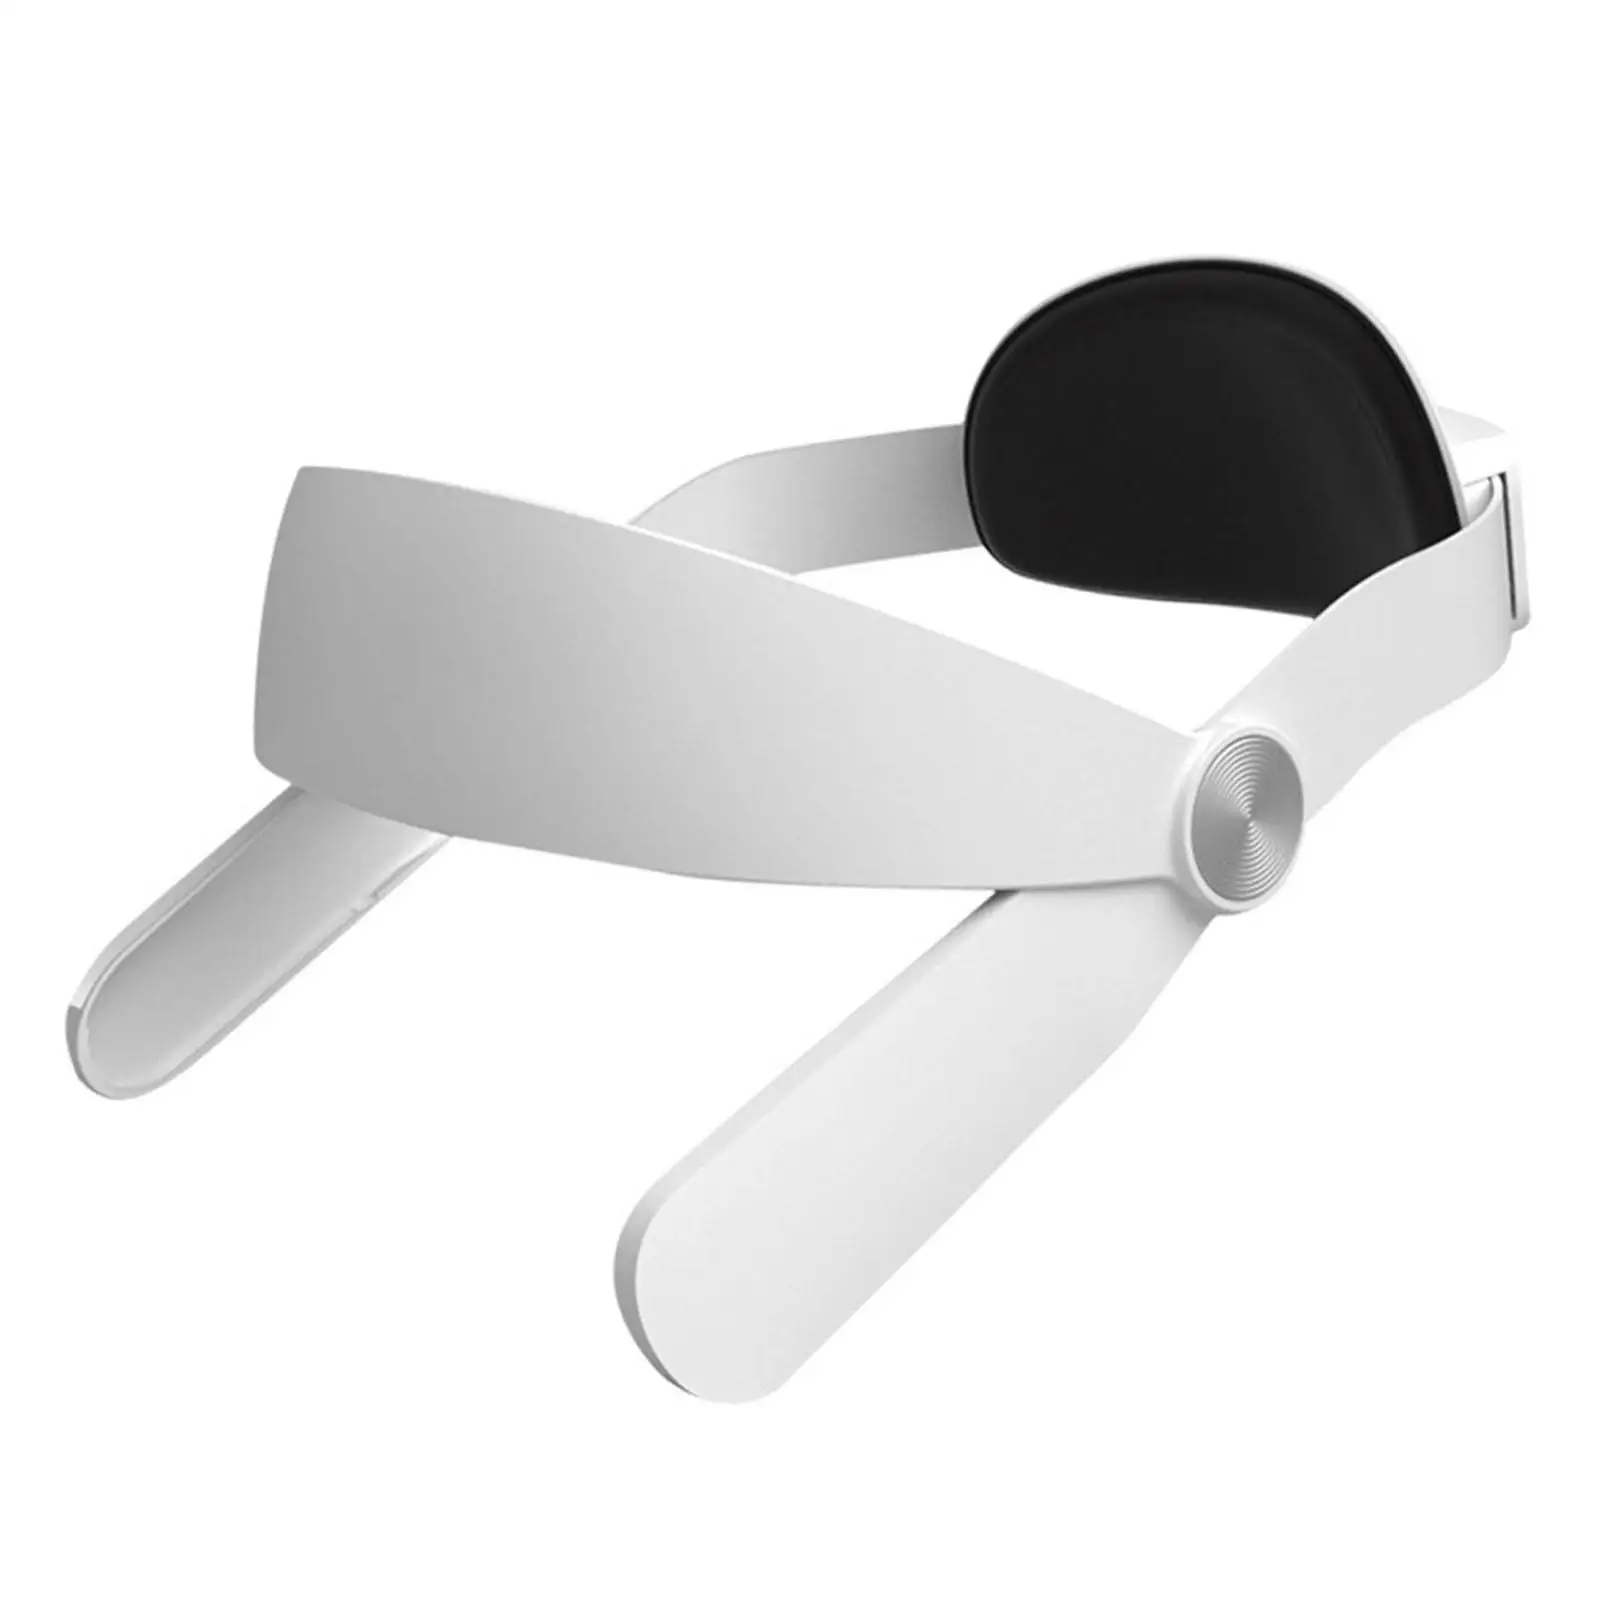 Adjustable Headband Replacement with Cushion Pad VR Head Strap for 3D Glasses Protective Accessories White